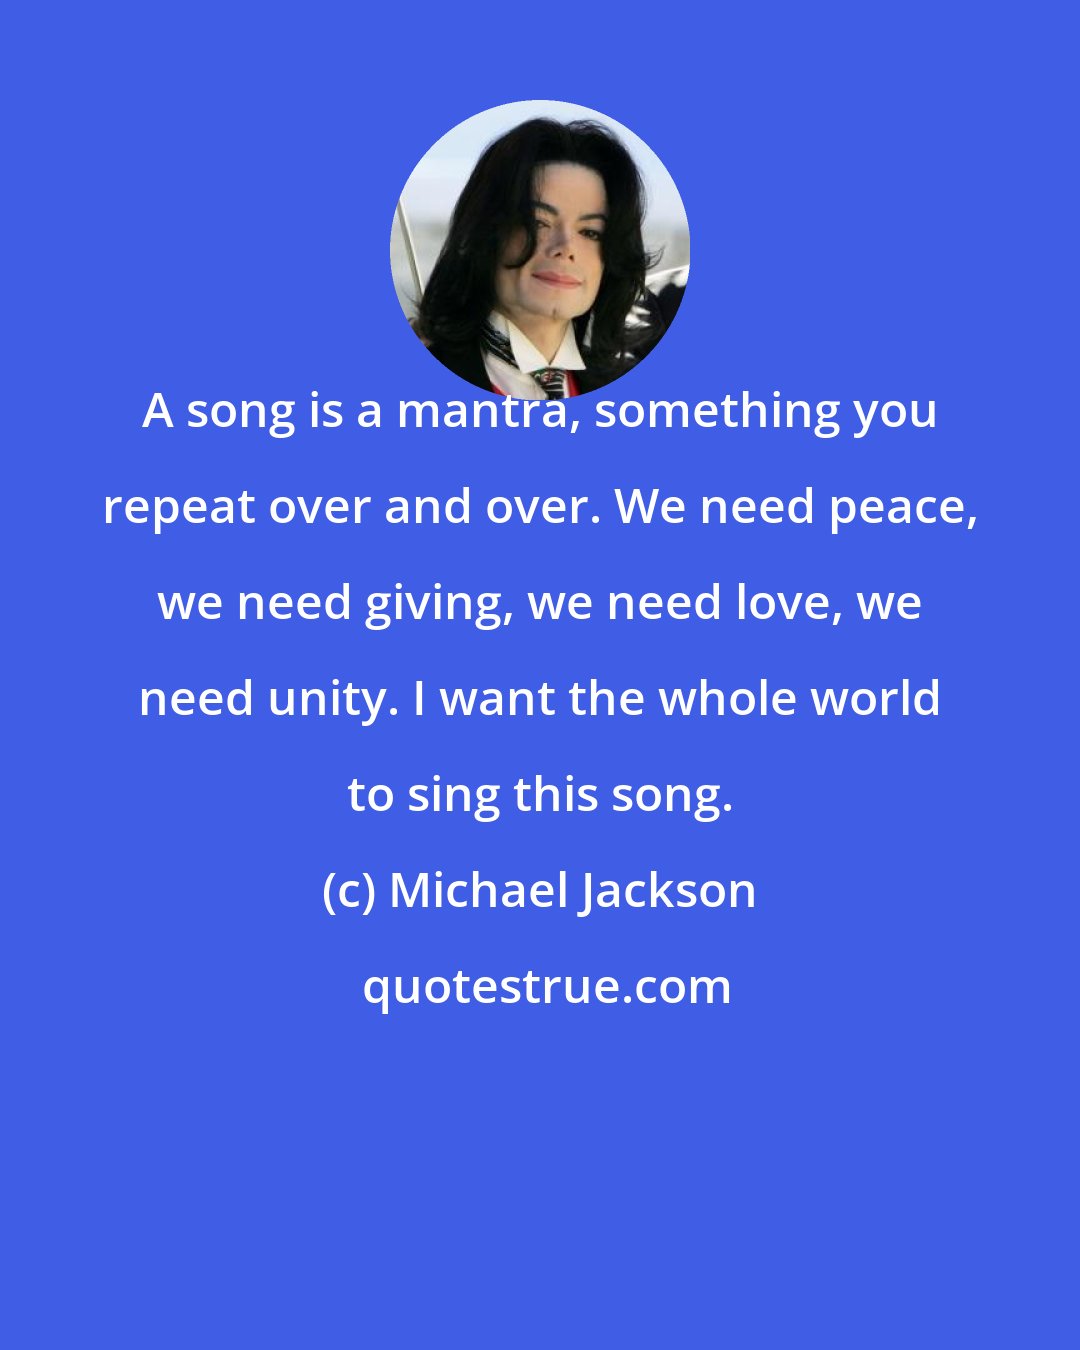 Michael Jackson: A song is a mantra, something you repeat over and over. We need peace, we need giving, we need love, we need unity. I want the whole world to sing this song.